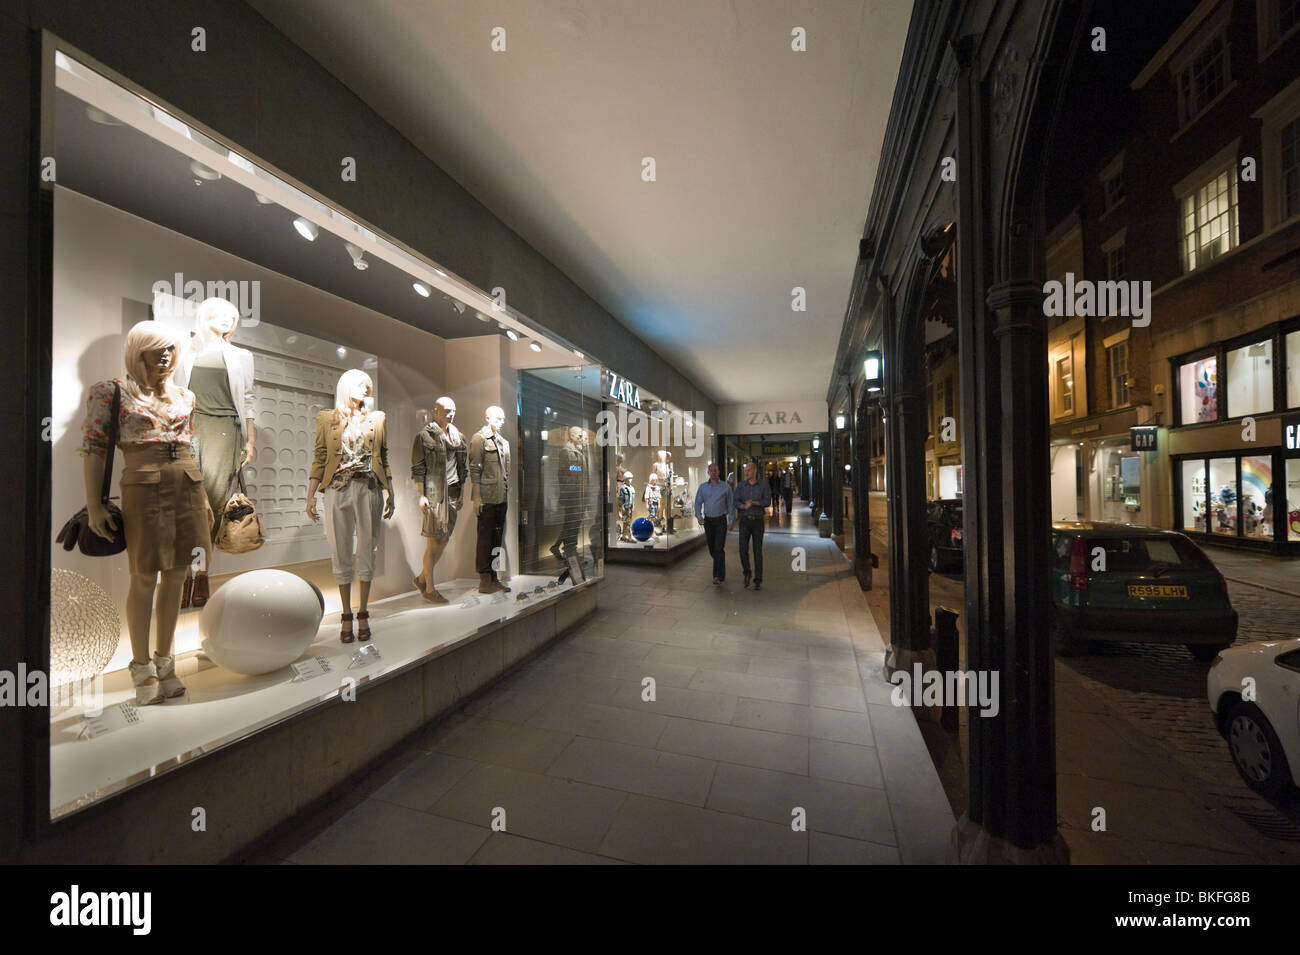 The Zara store at night on Eastgate, one of The Rows in the historic ...